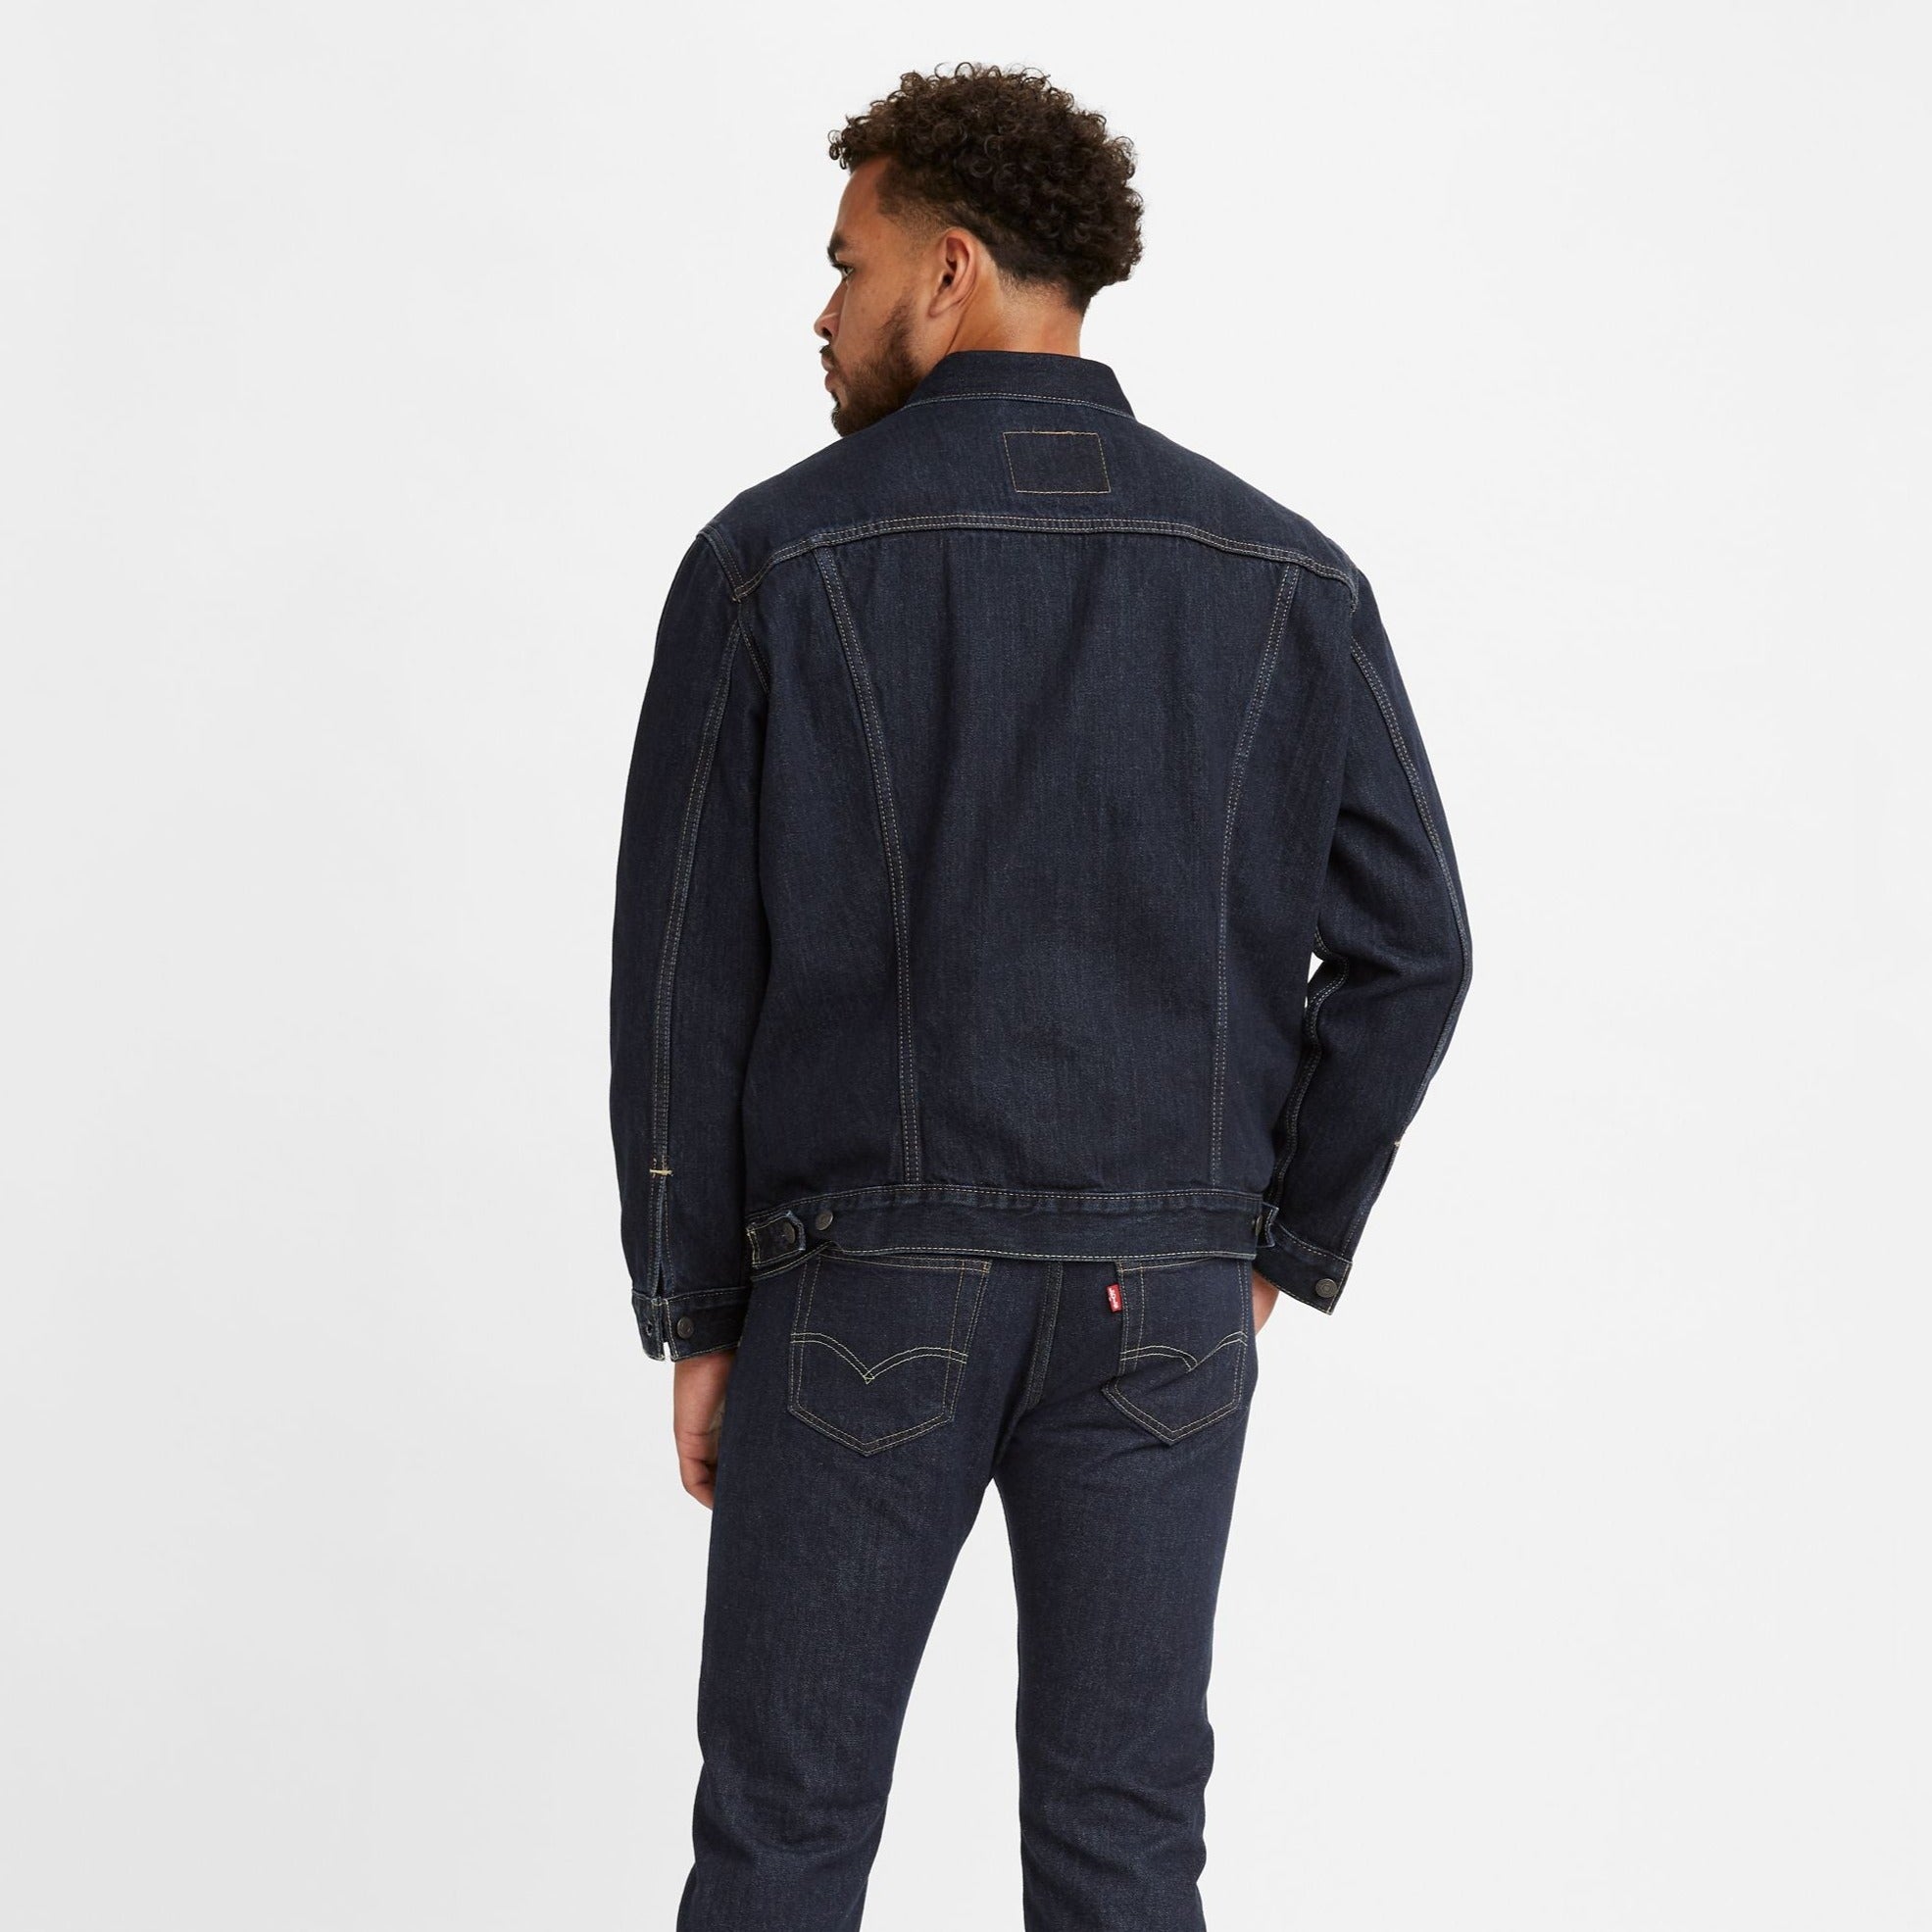 How to Spot Fake Levi's?